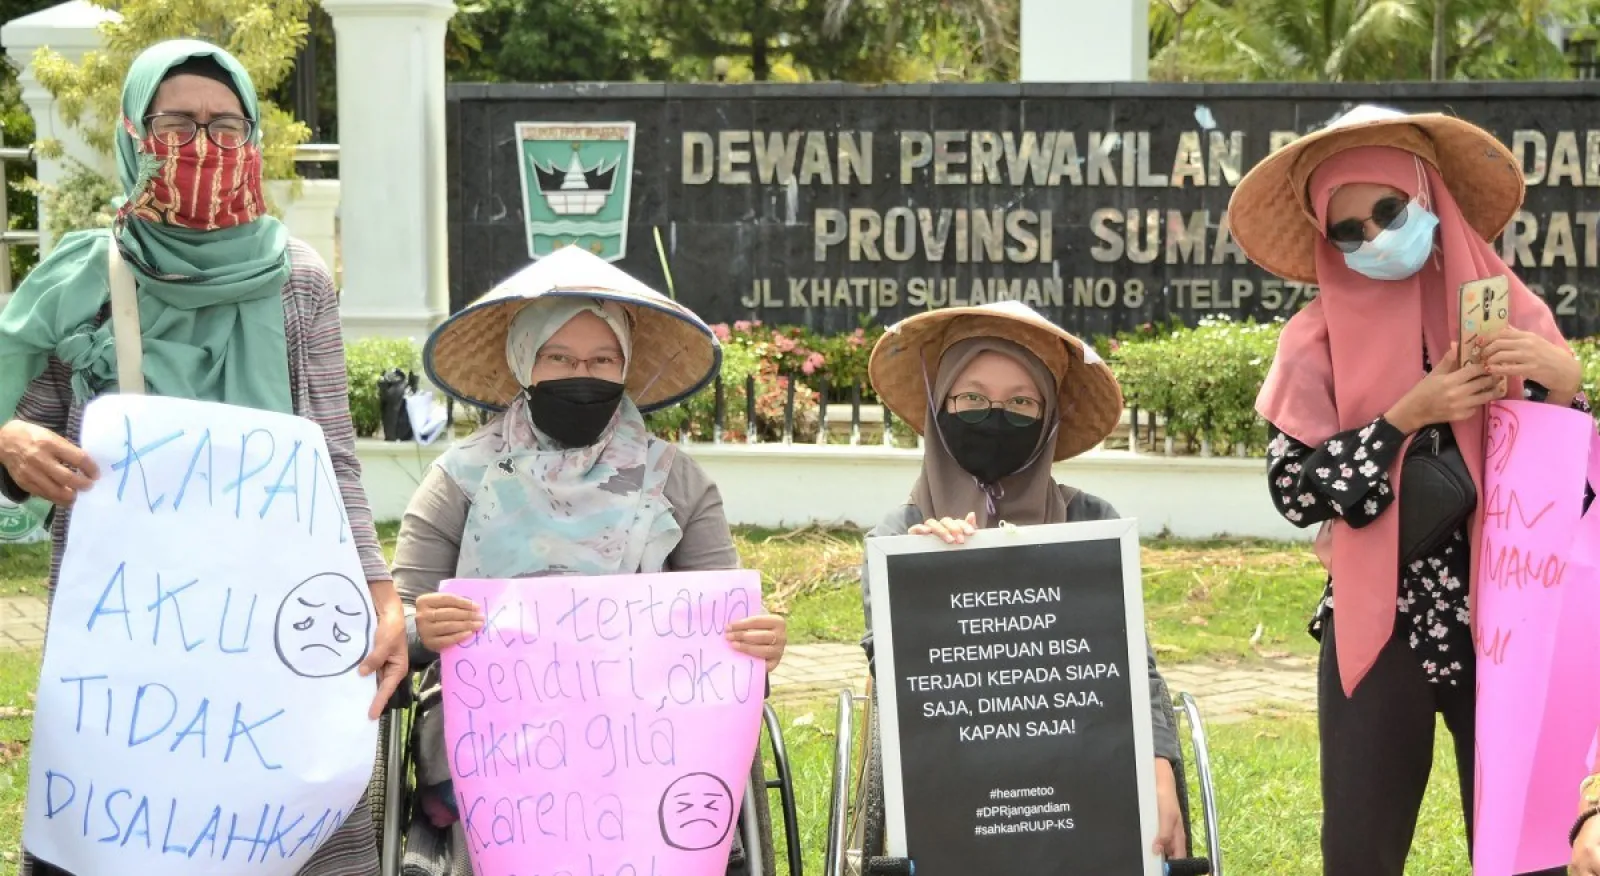 Four women stand in front of an Indonesian government building, holding signs calling for womens rights. Two women are in wheelchairs, and their friends stand next to them. All four women wear headscarves and masks, and look cheerfully at the camera.